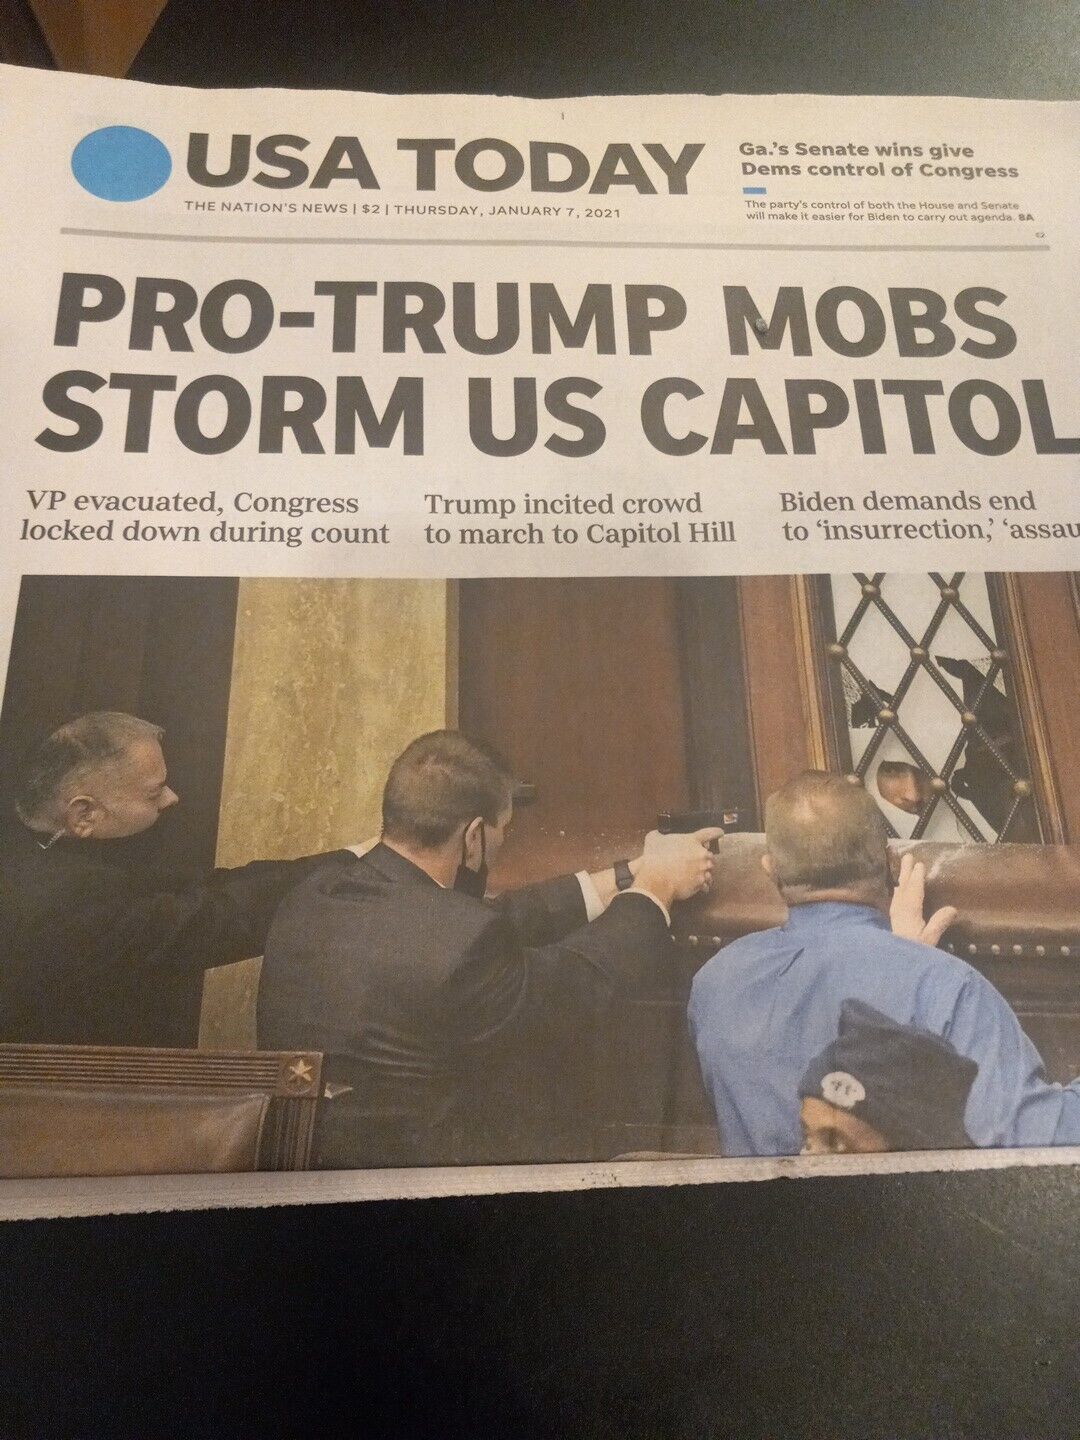 USA TODAY NEWSPAPER THURSDAY January 7 2021  PRO -TRUMP MOBS STORM US CAPITOL